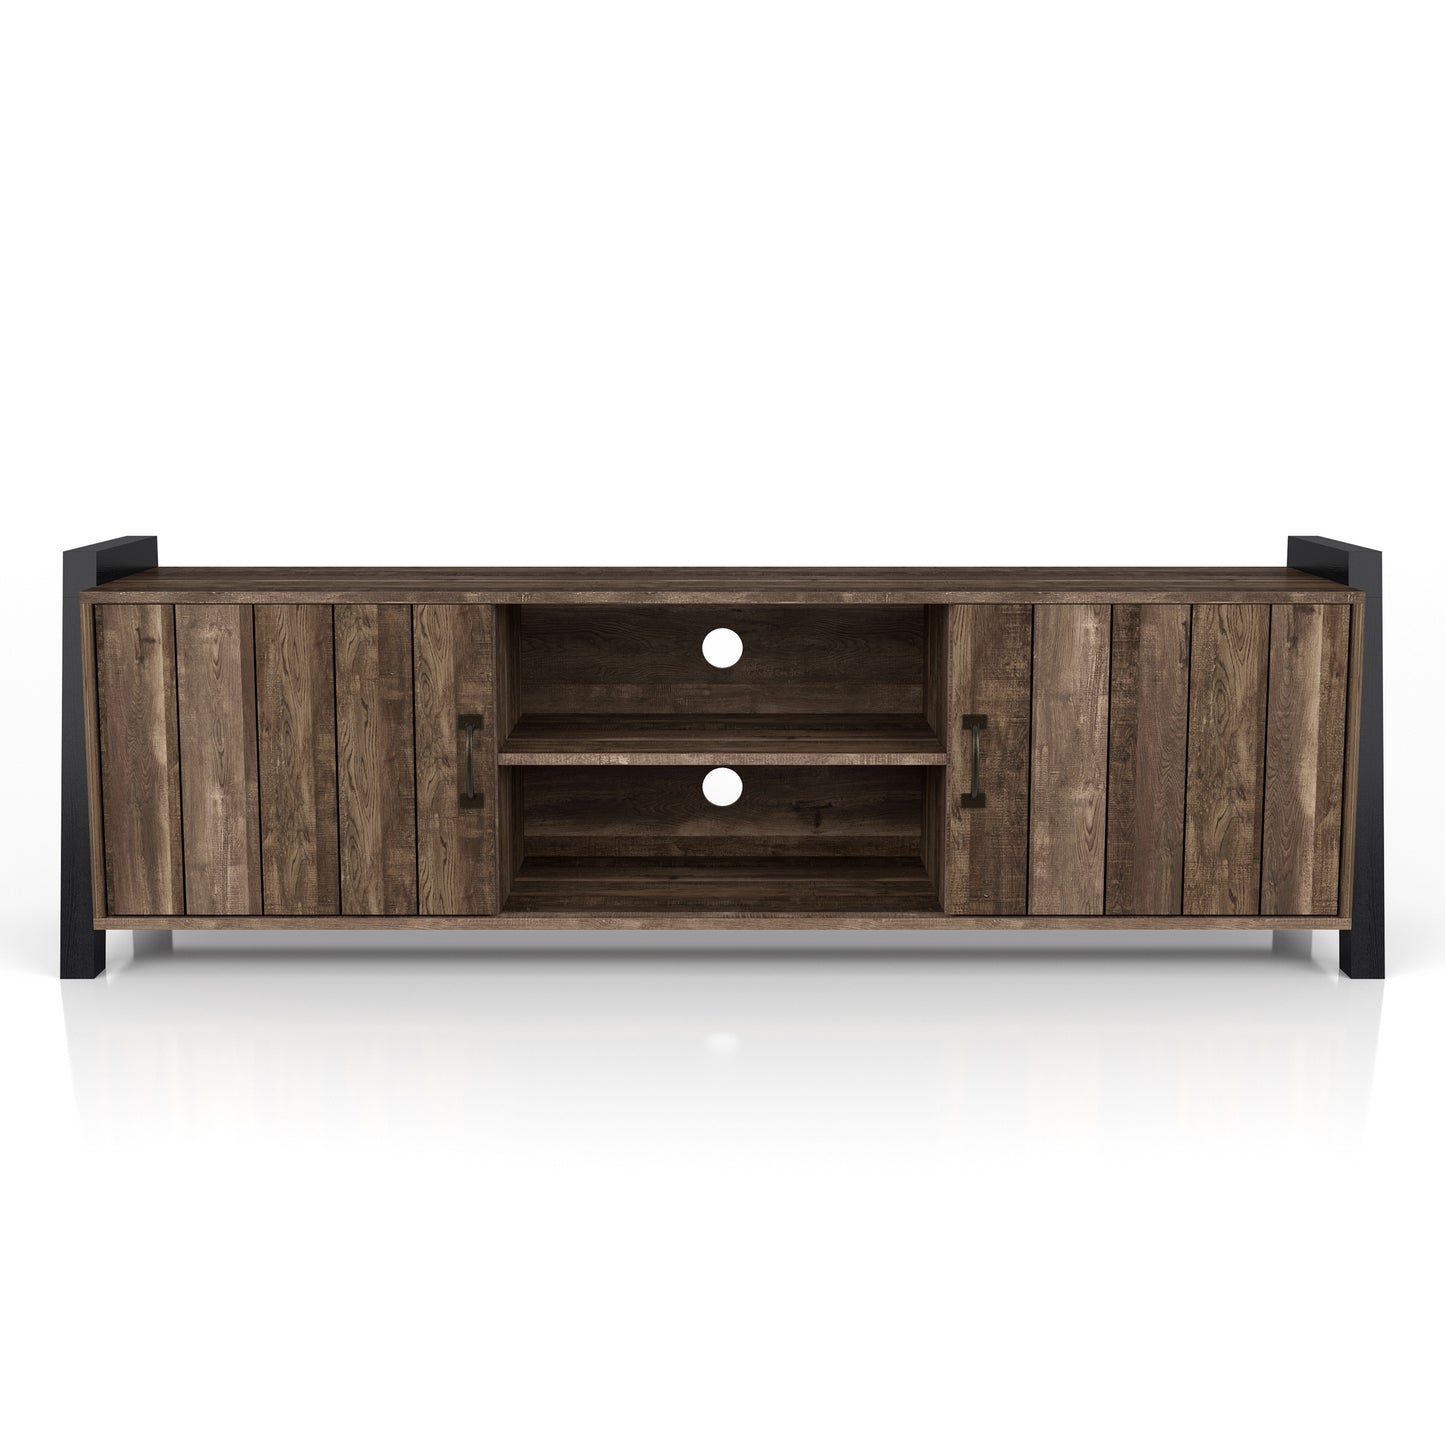 Front-facing farmhouse reclaimed oak and black six-shelf TV stand on a white background